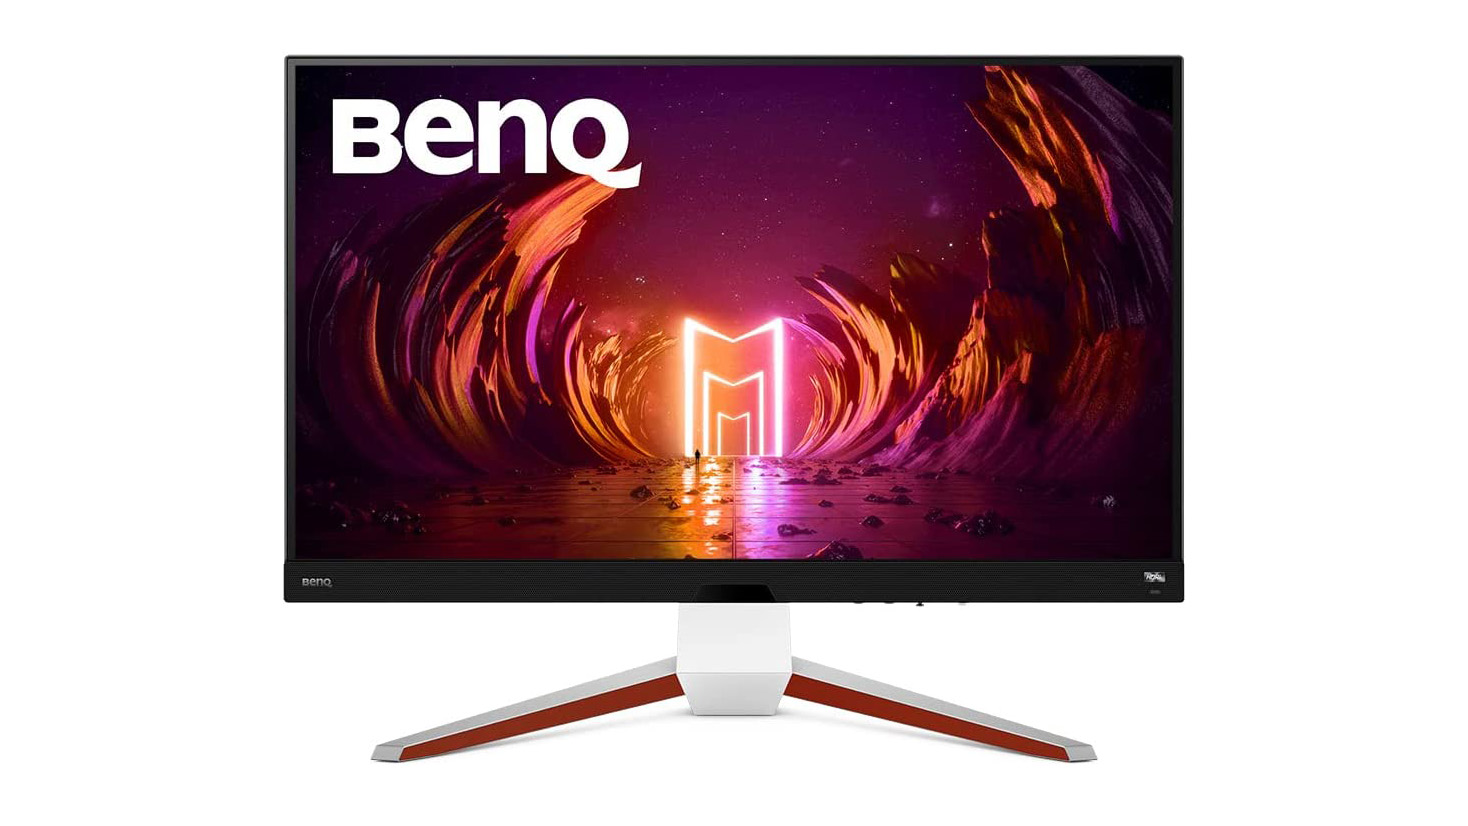 Product shot of BenQ EX32I0U, one of the best monitors for PS5